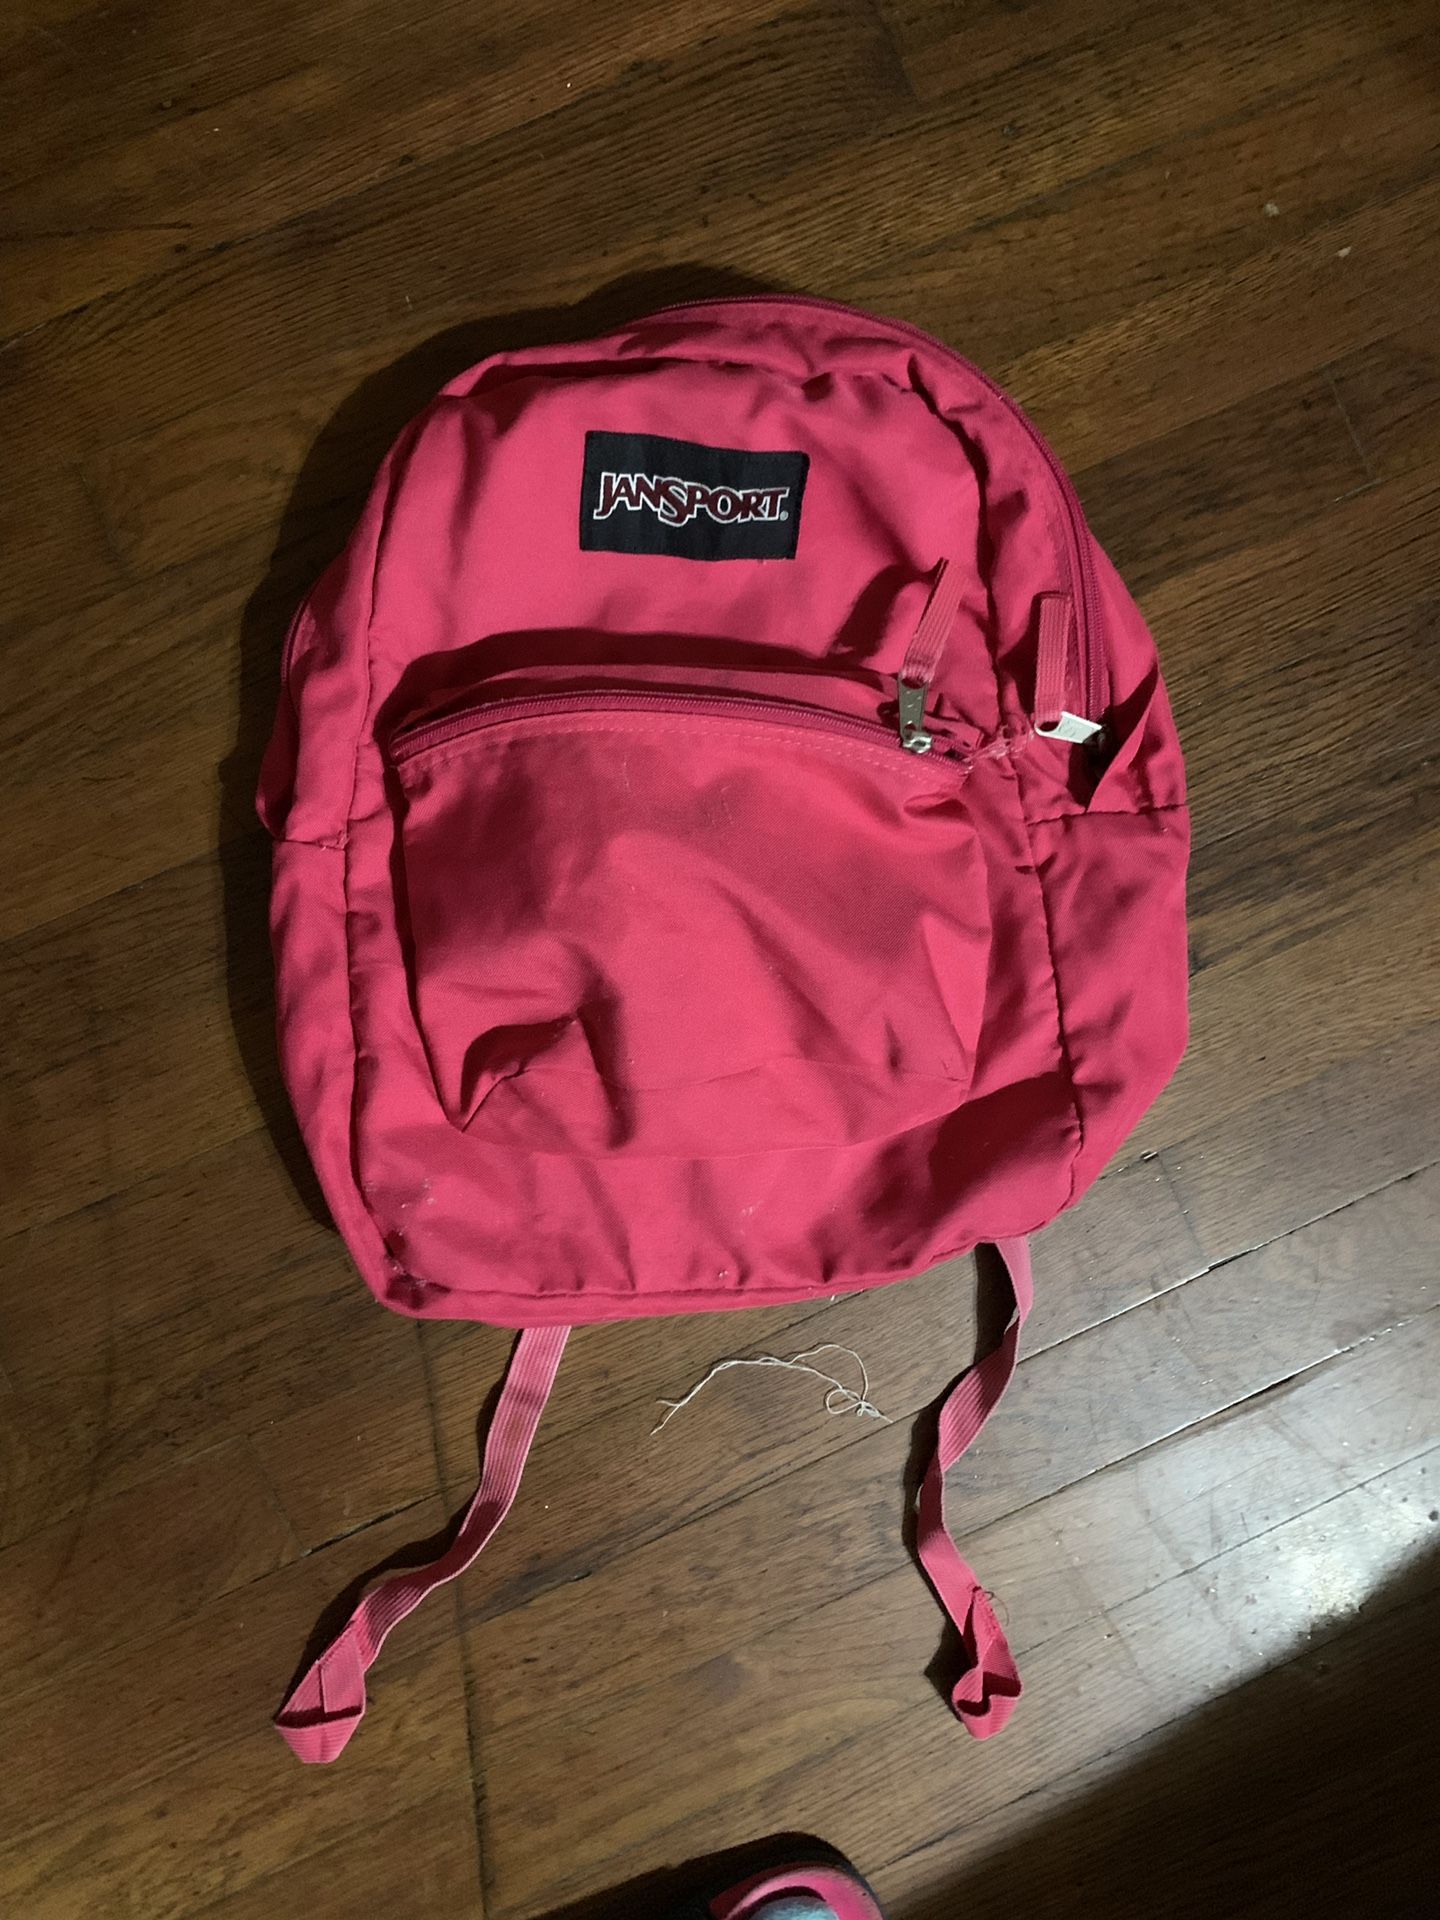 Jansport backpack all zippers work